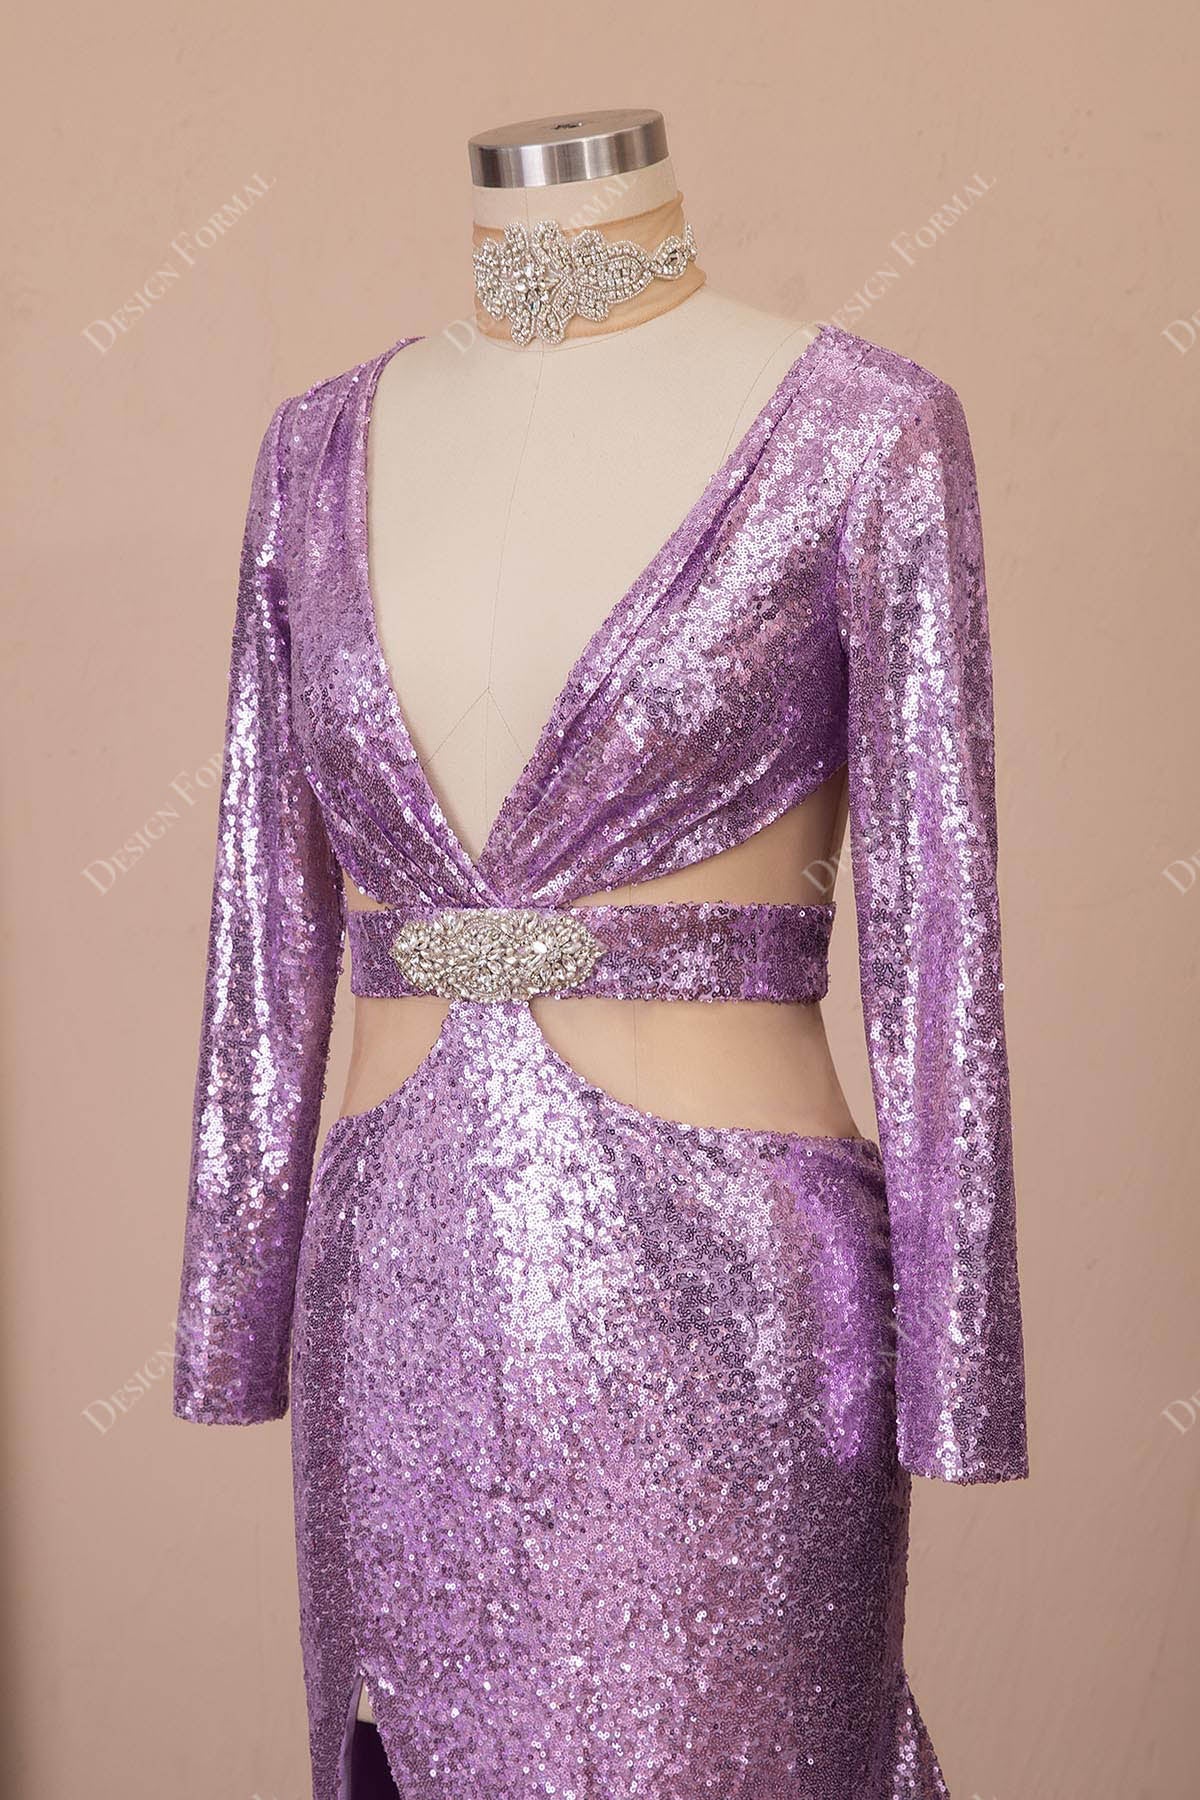 shiny-lilac-sequin-plunging-neck-bodice